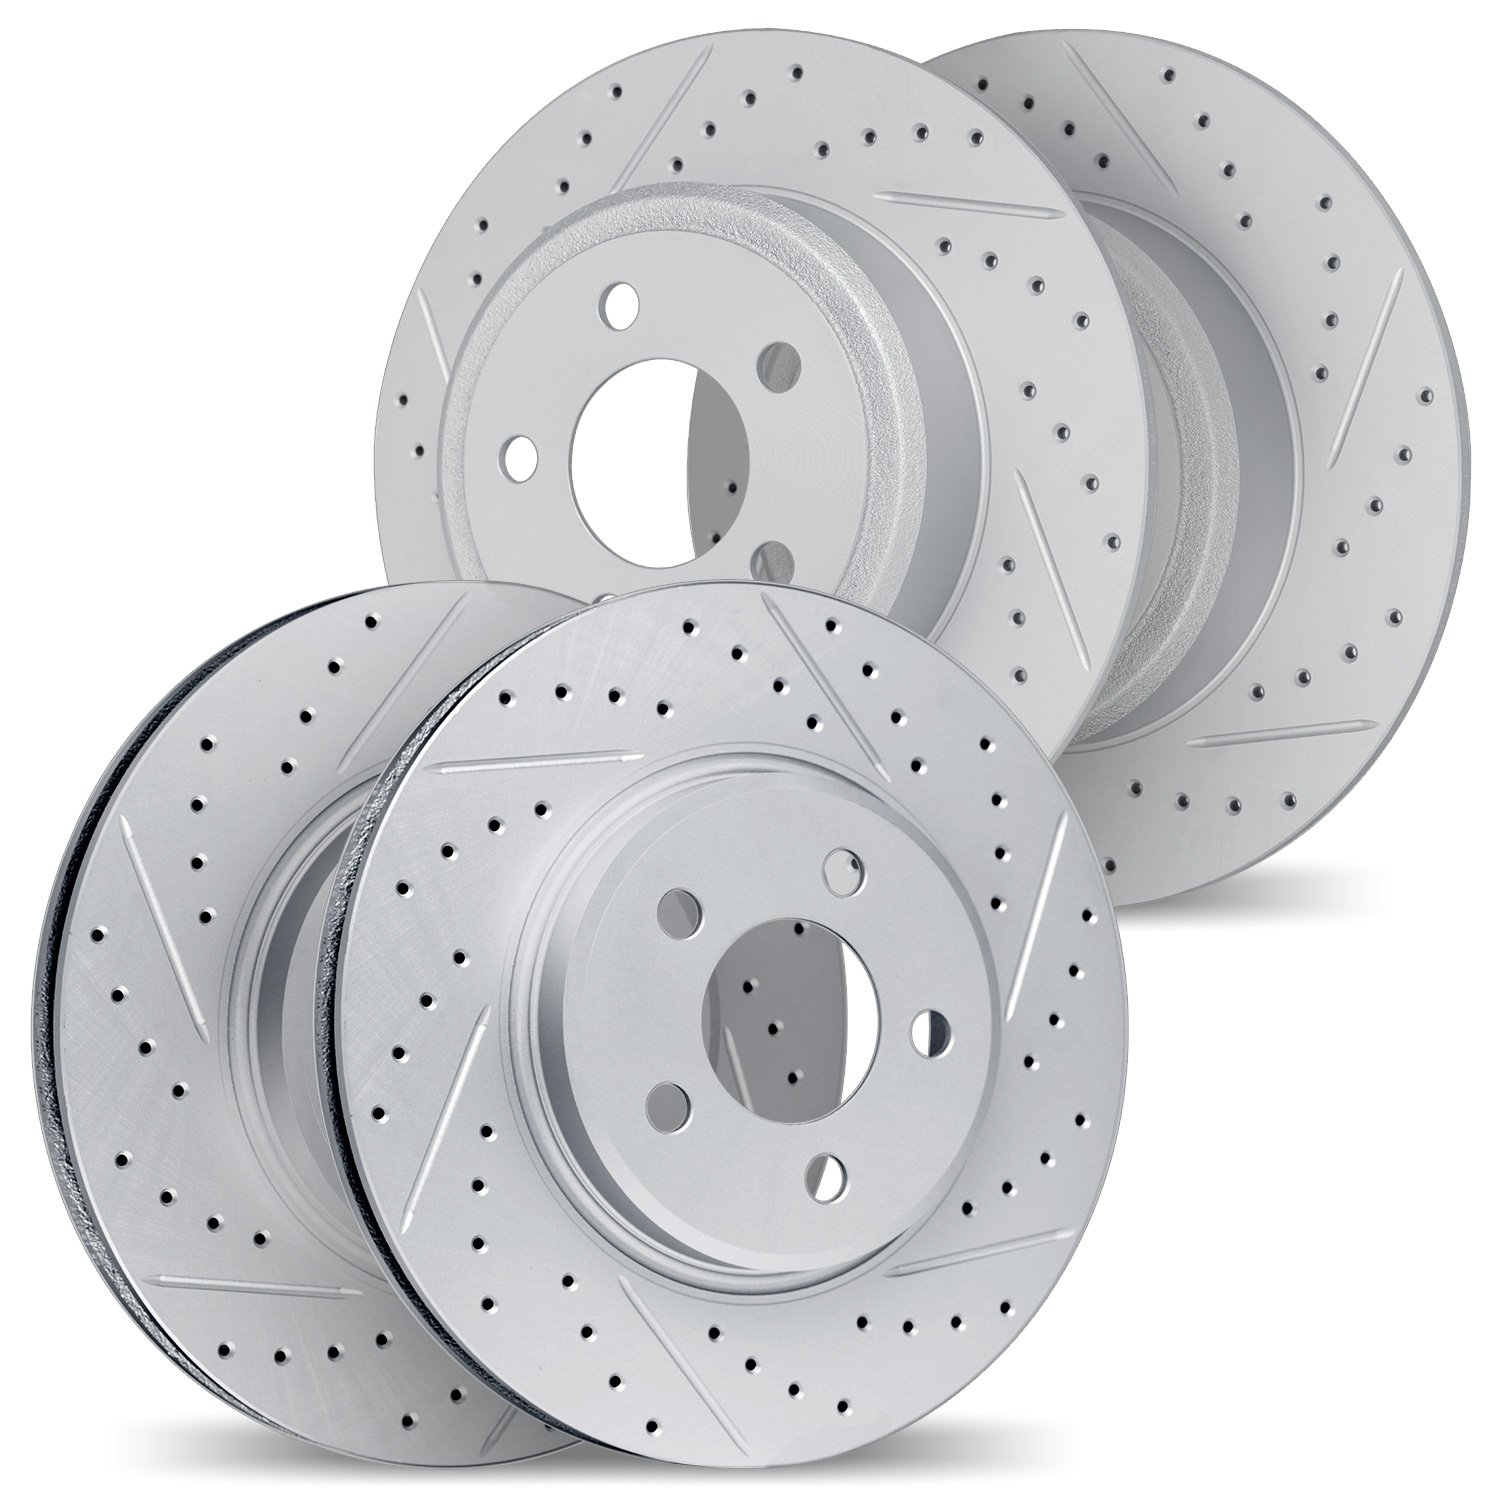 2004-21006 Geoperformance Drilled/Slotted Brake Rotors, 2017-2020 Kia/Hyundai/Genesis, Position: Front and Rear